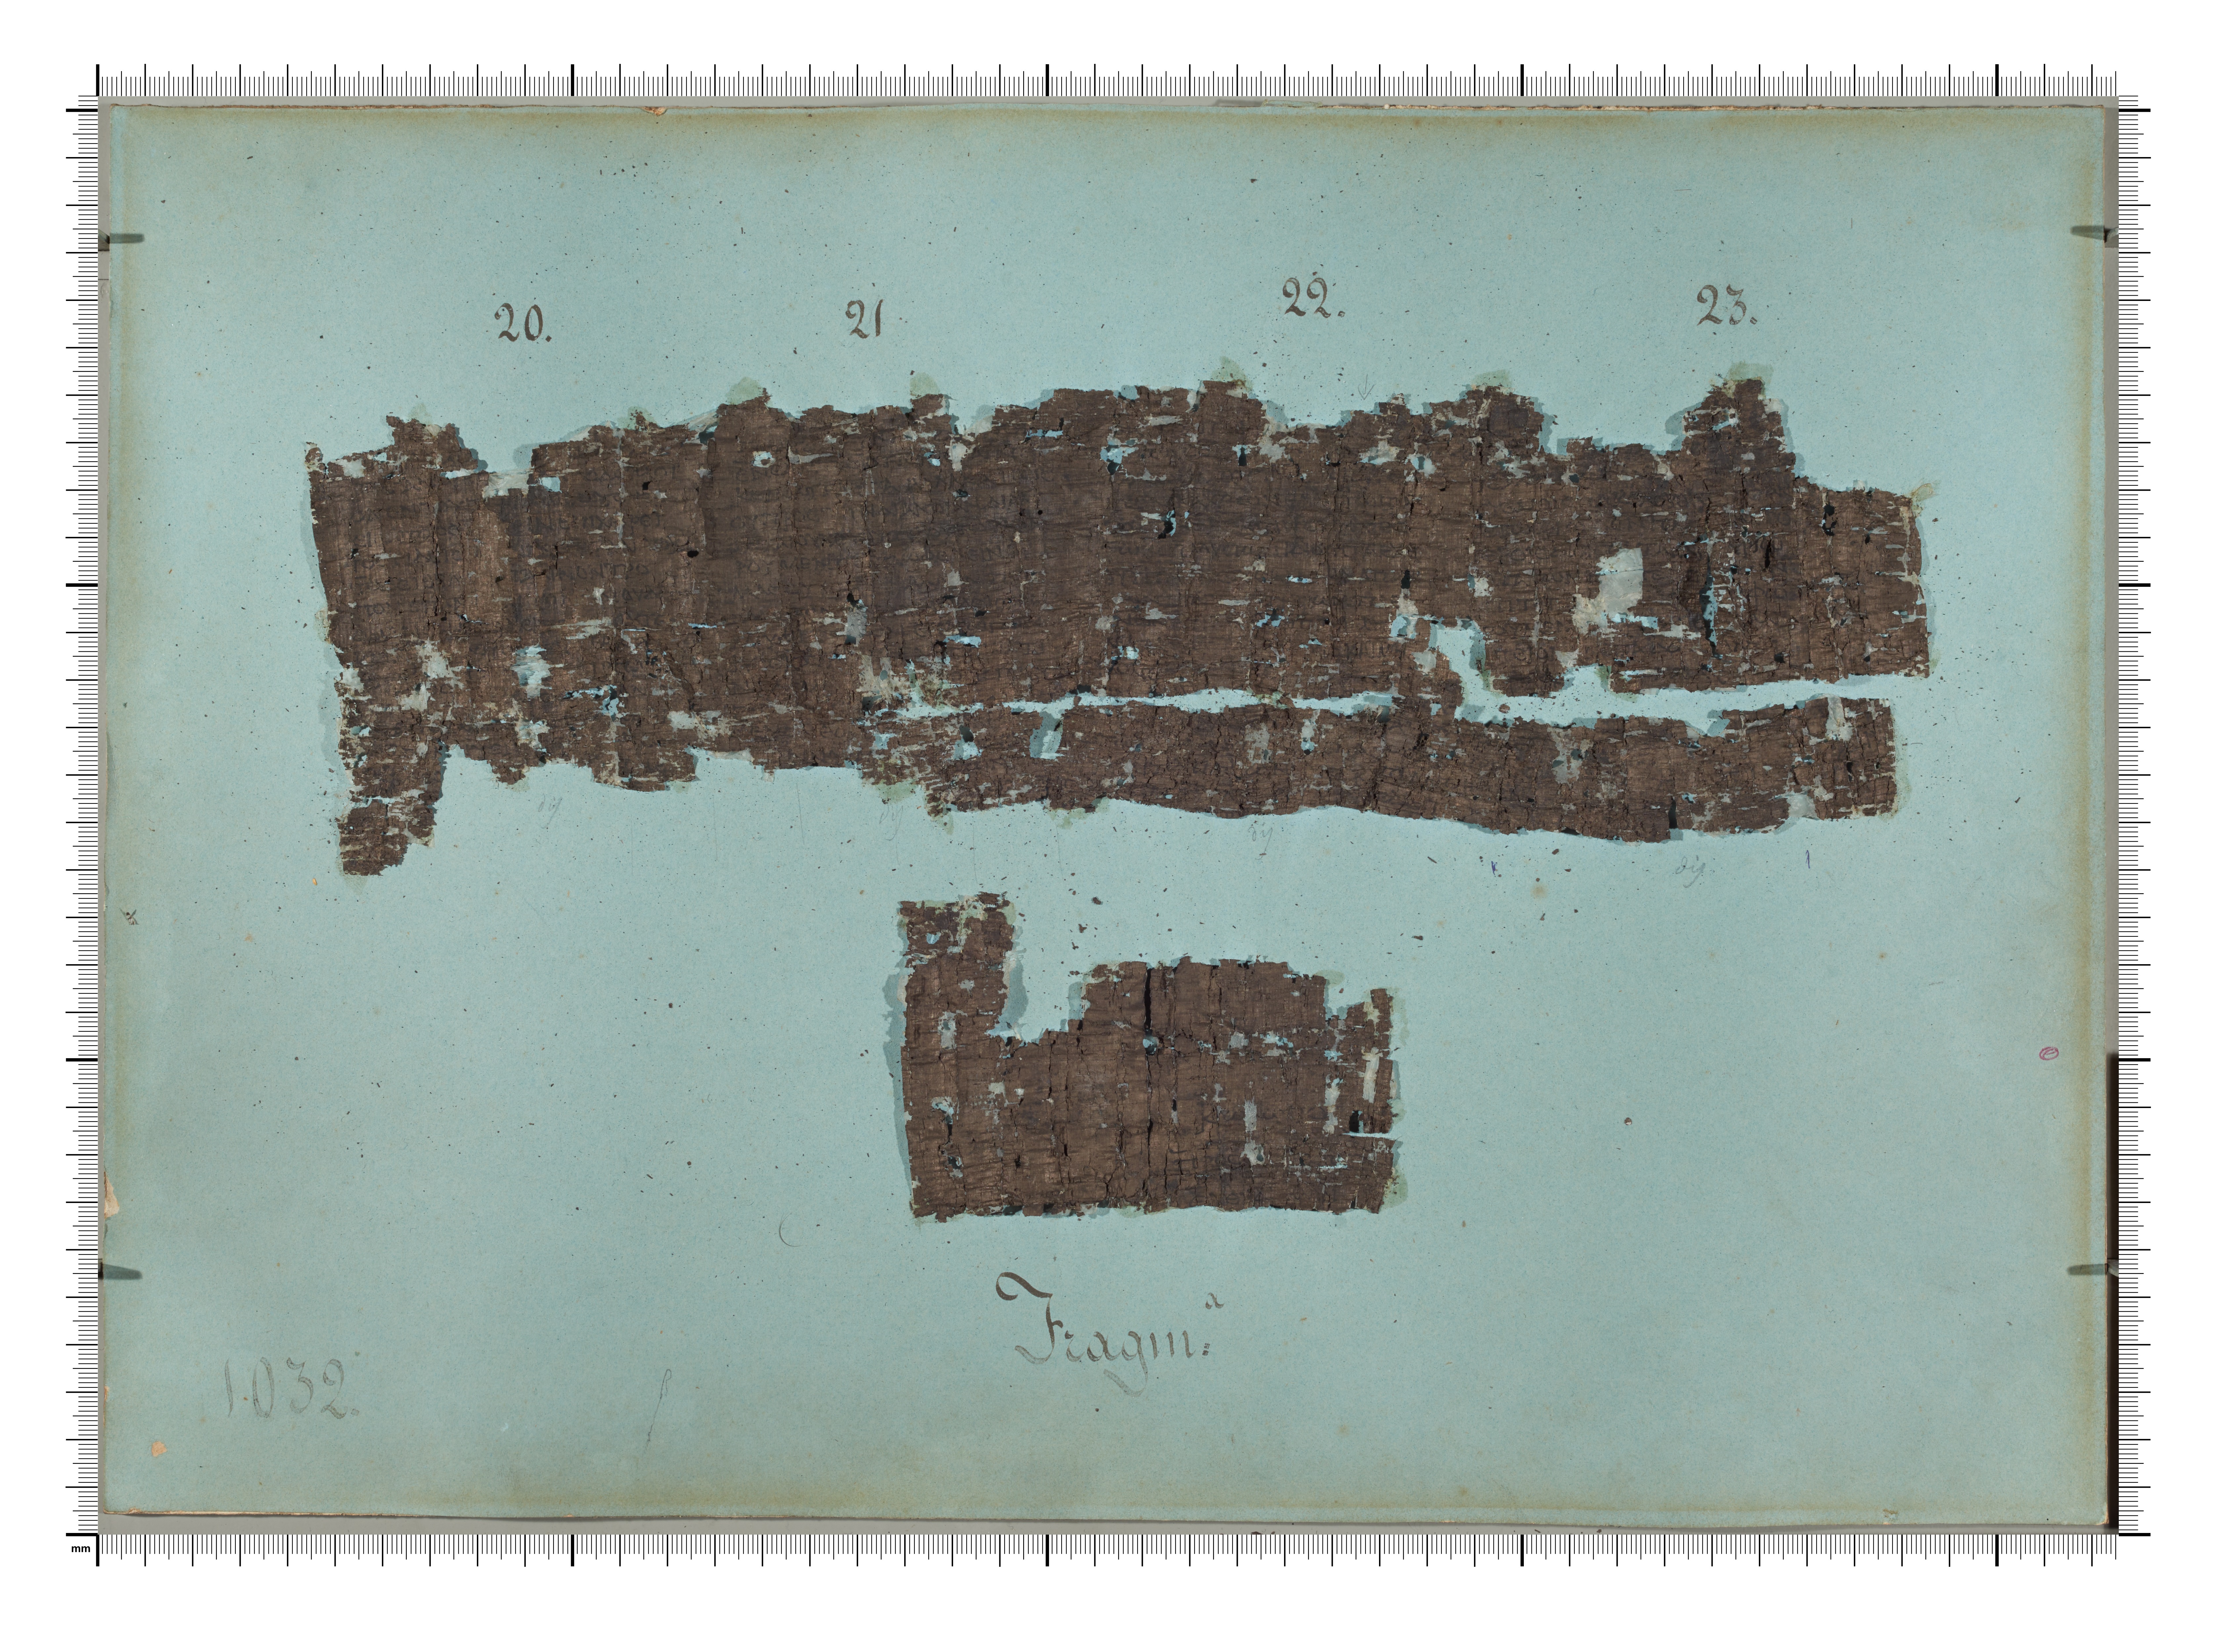 charred scroll fragments laid out against blue background